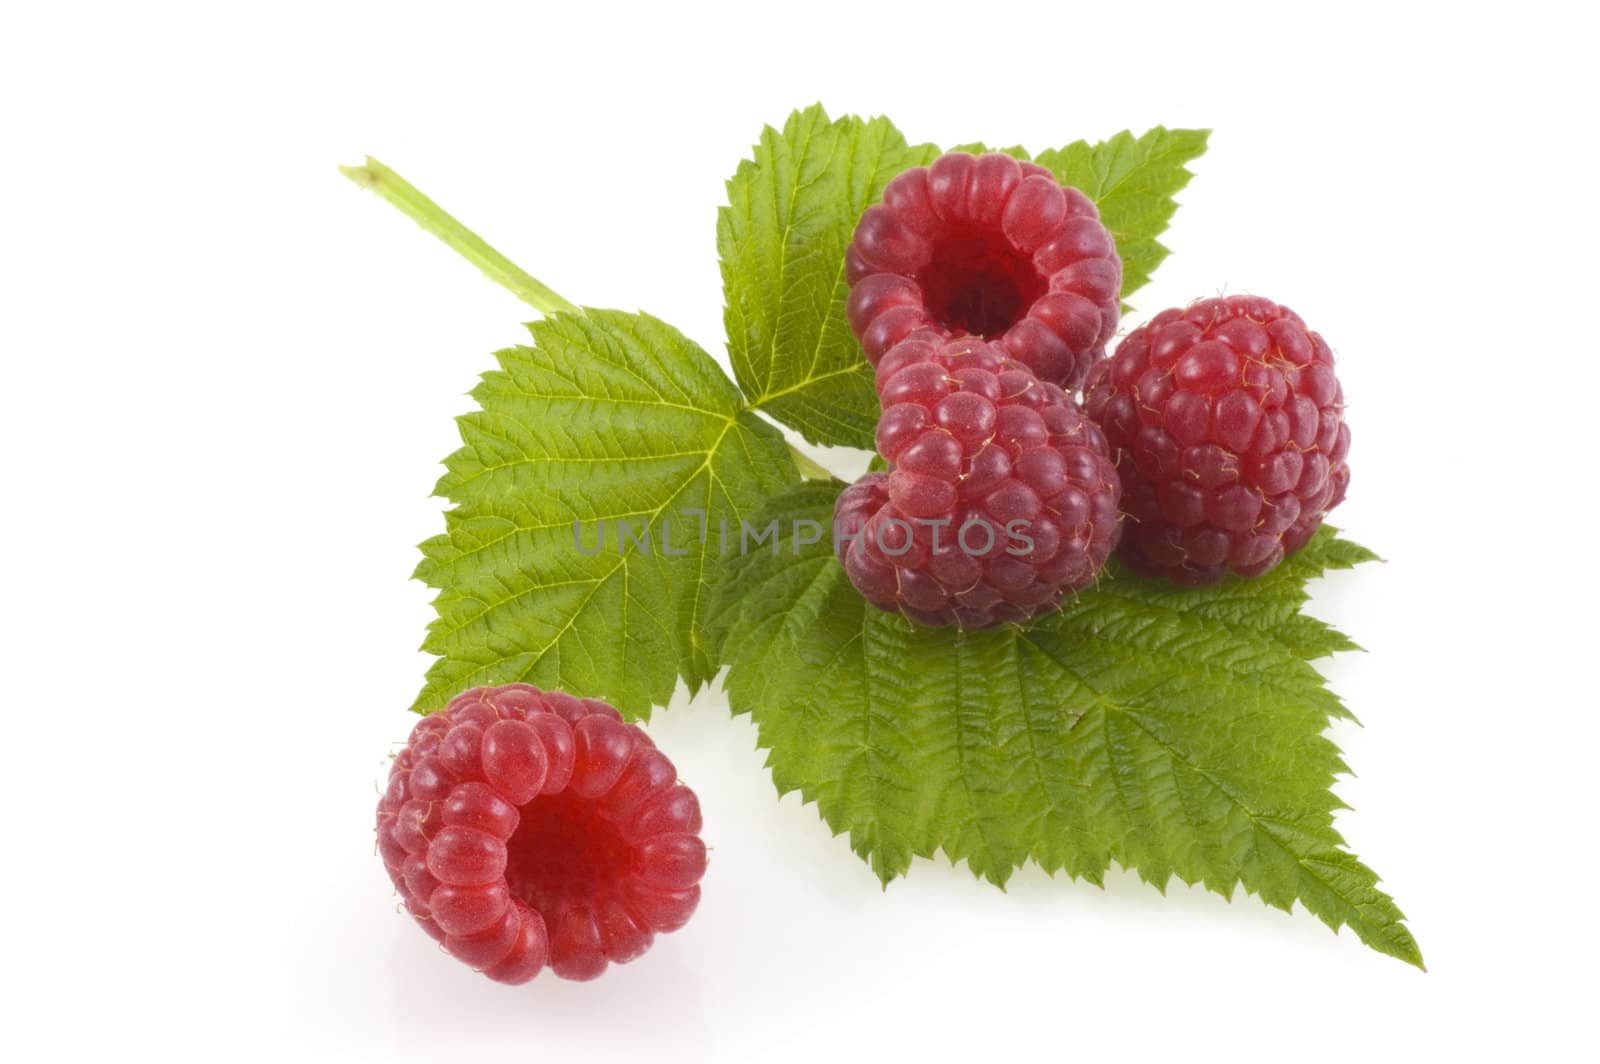 Four juicy raspberries and a leaf isolated on white.